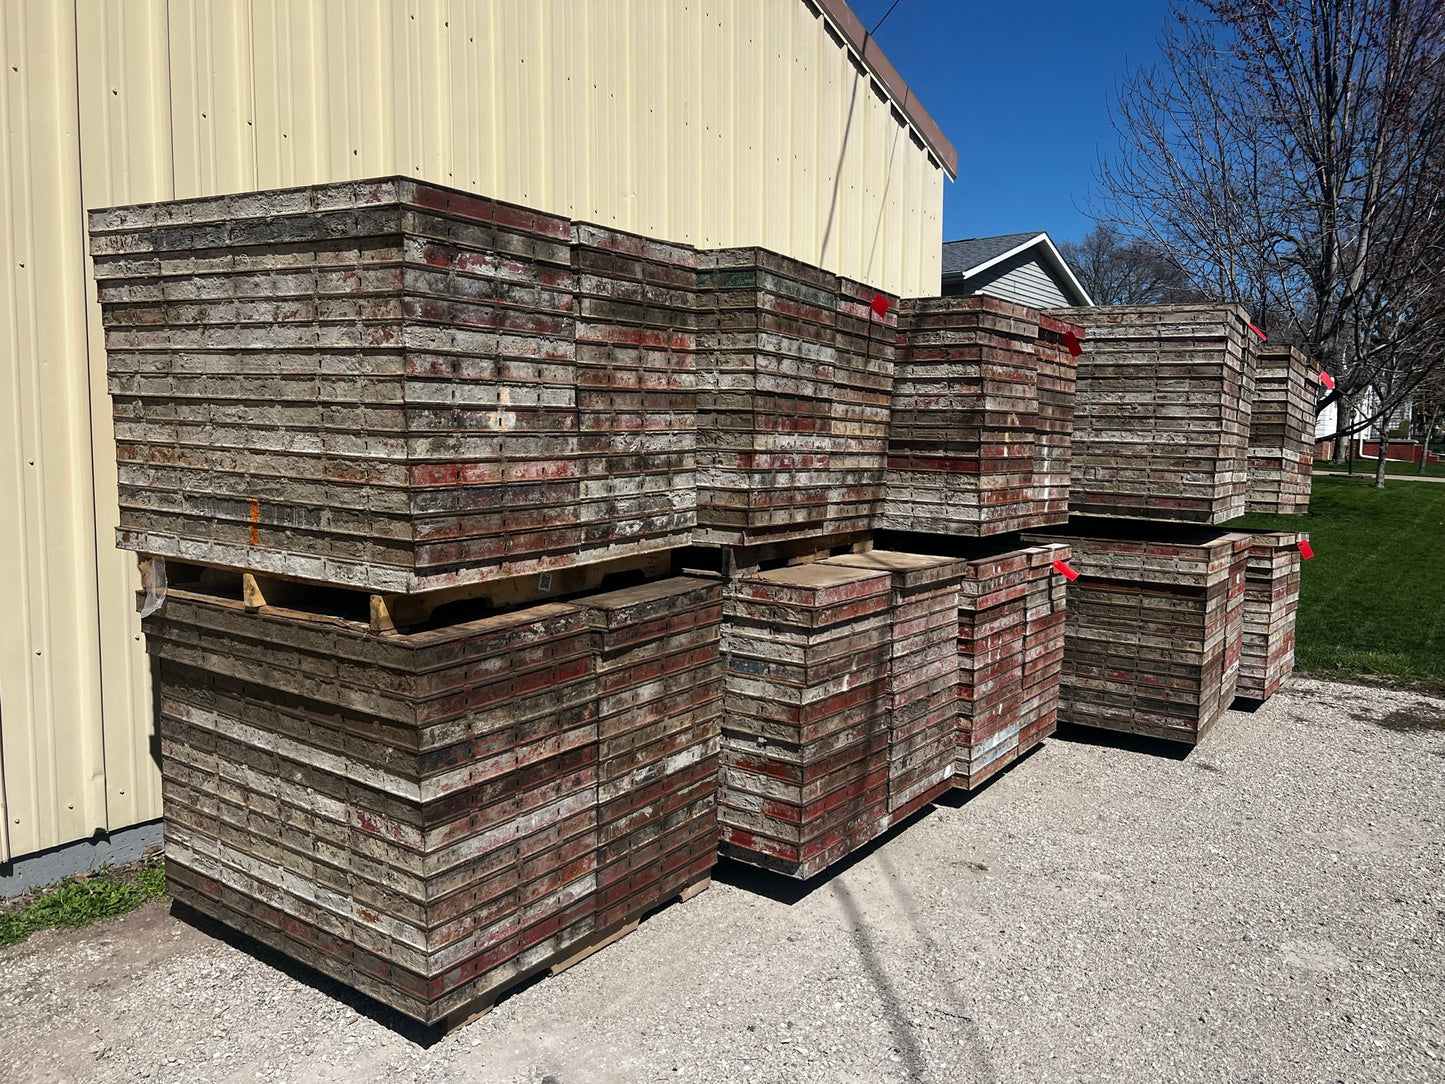 Symons Steel-Ply Concrete Forms